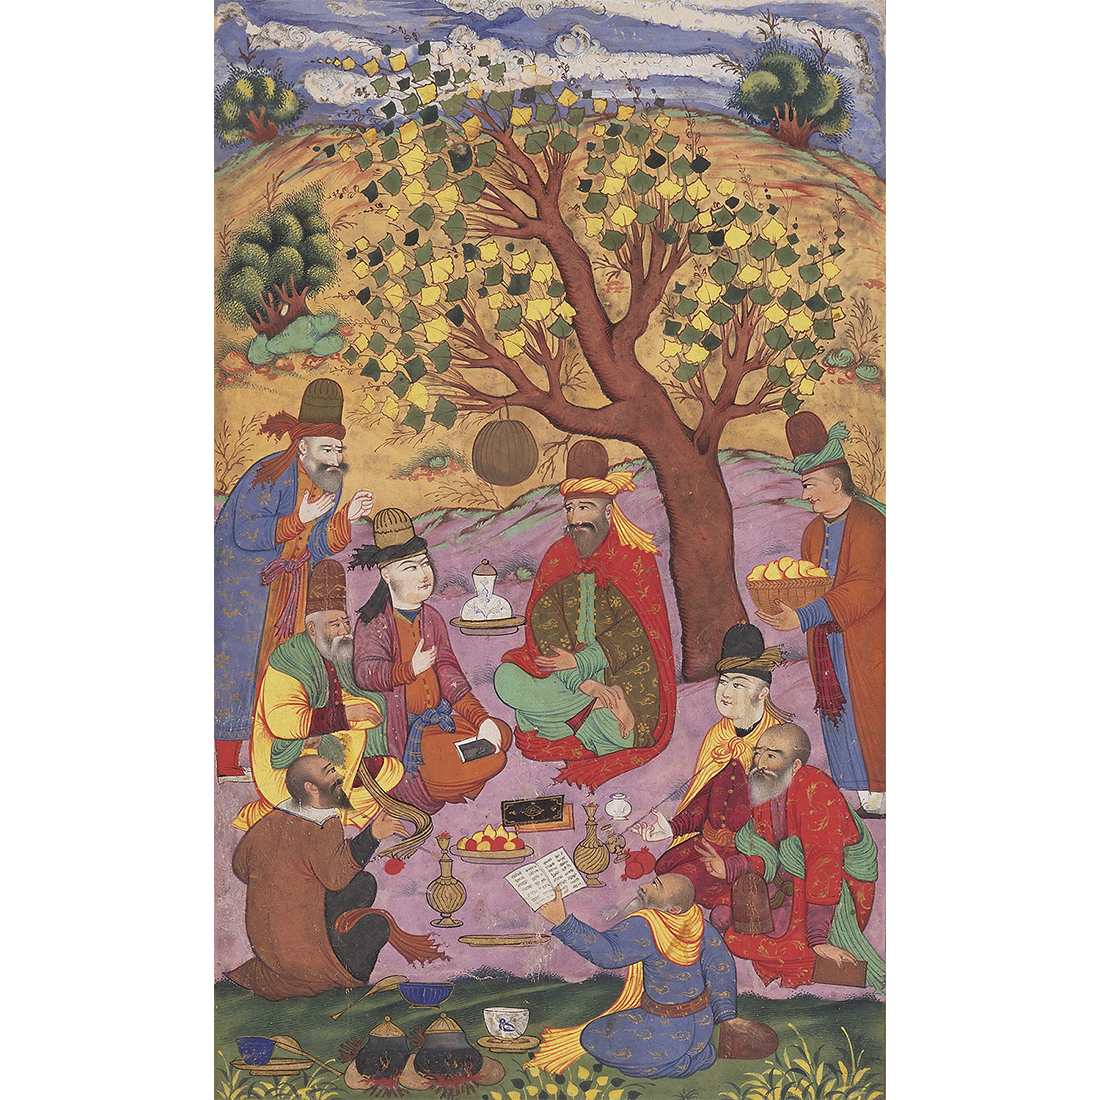 Men in robes gathered beneath a tree eating and reading